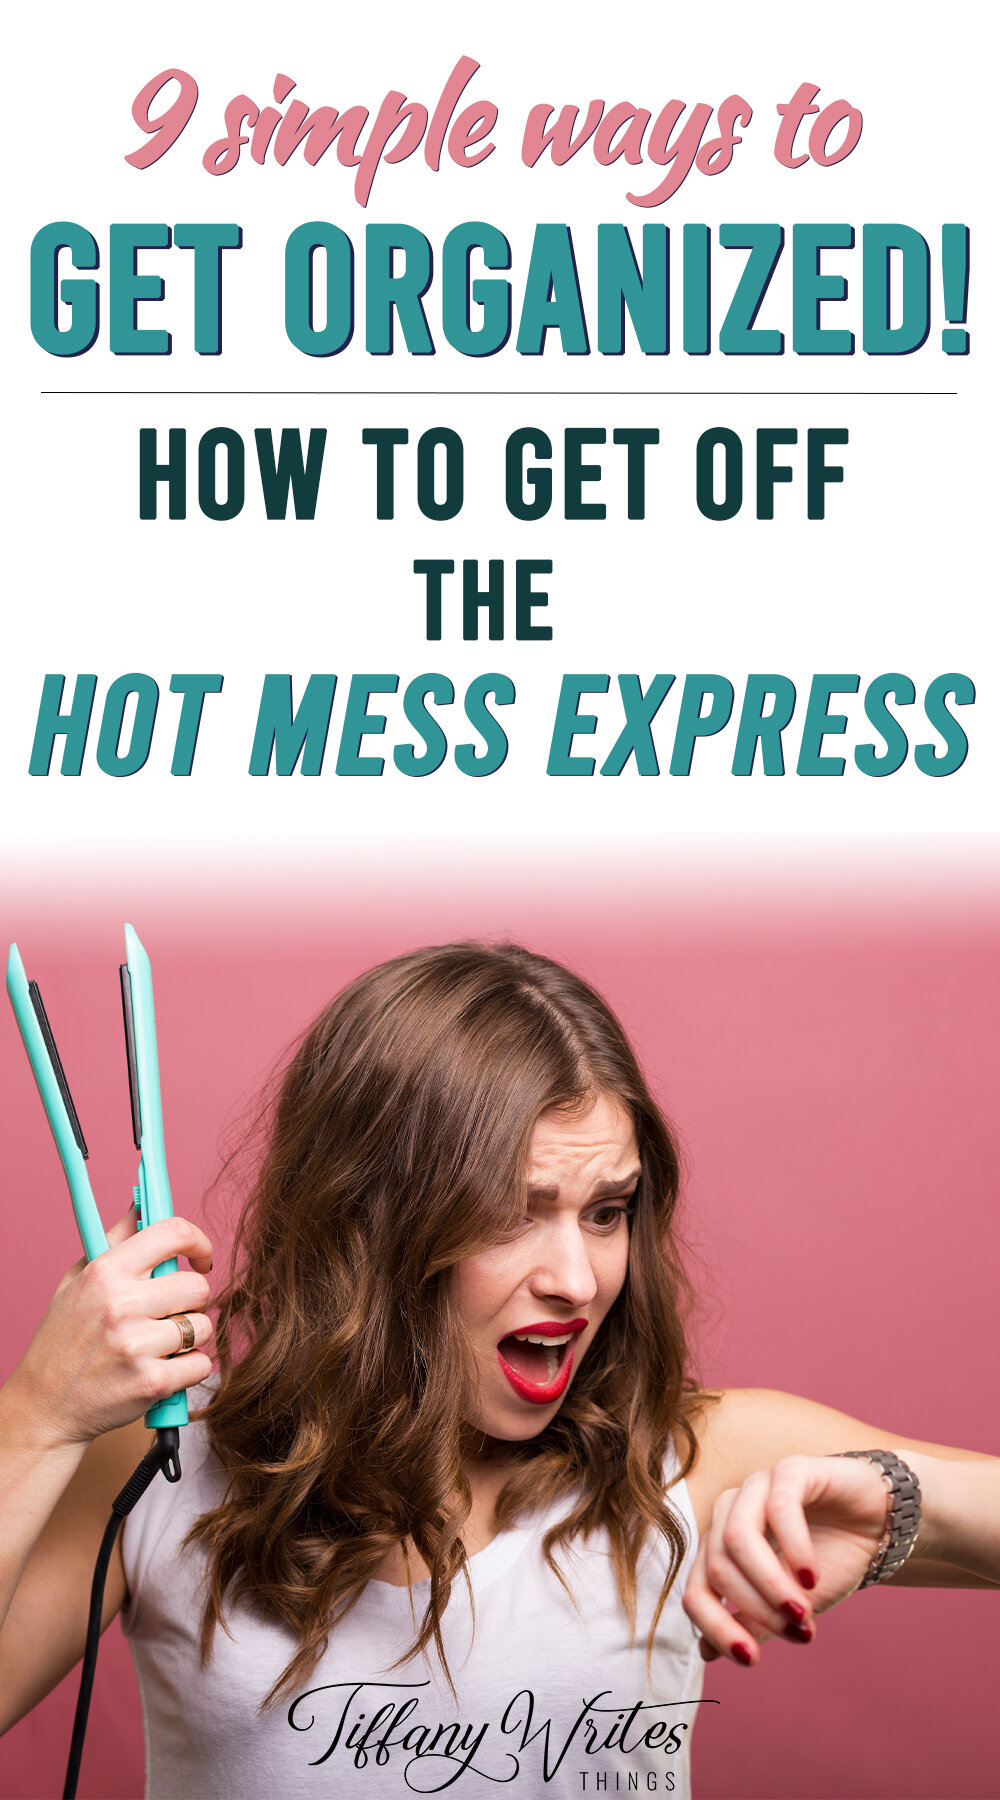 Give Yourself A High Five - Braving the Hot Mess